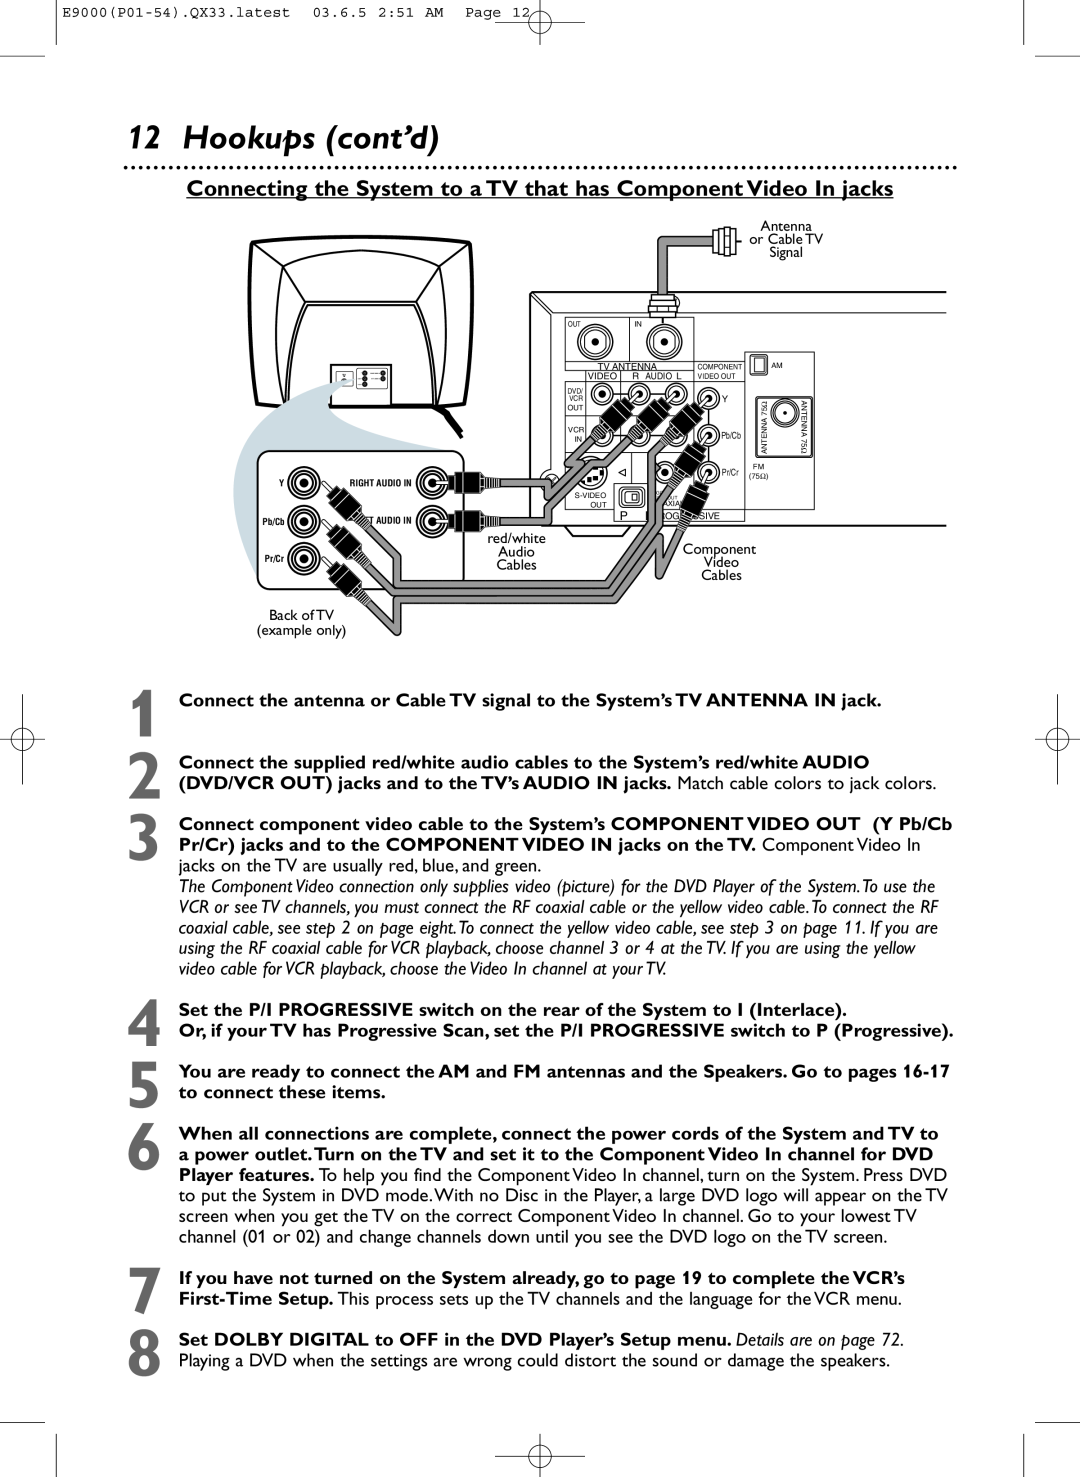 Magnavox MRD500VR owner manual Hookups cont’d, Connecting the System to a TV that has Component Video In jacks 